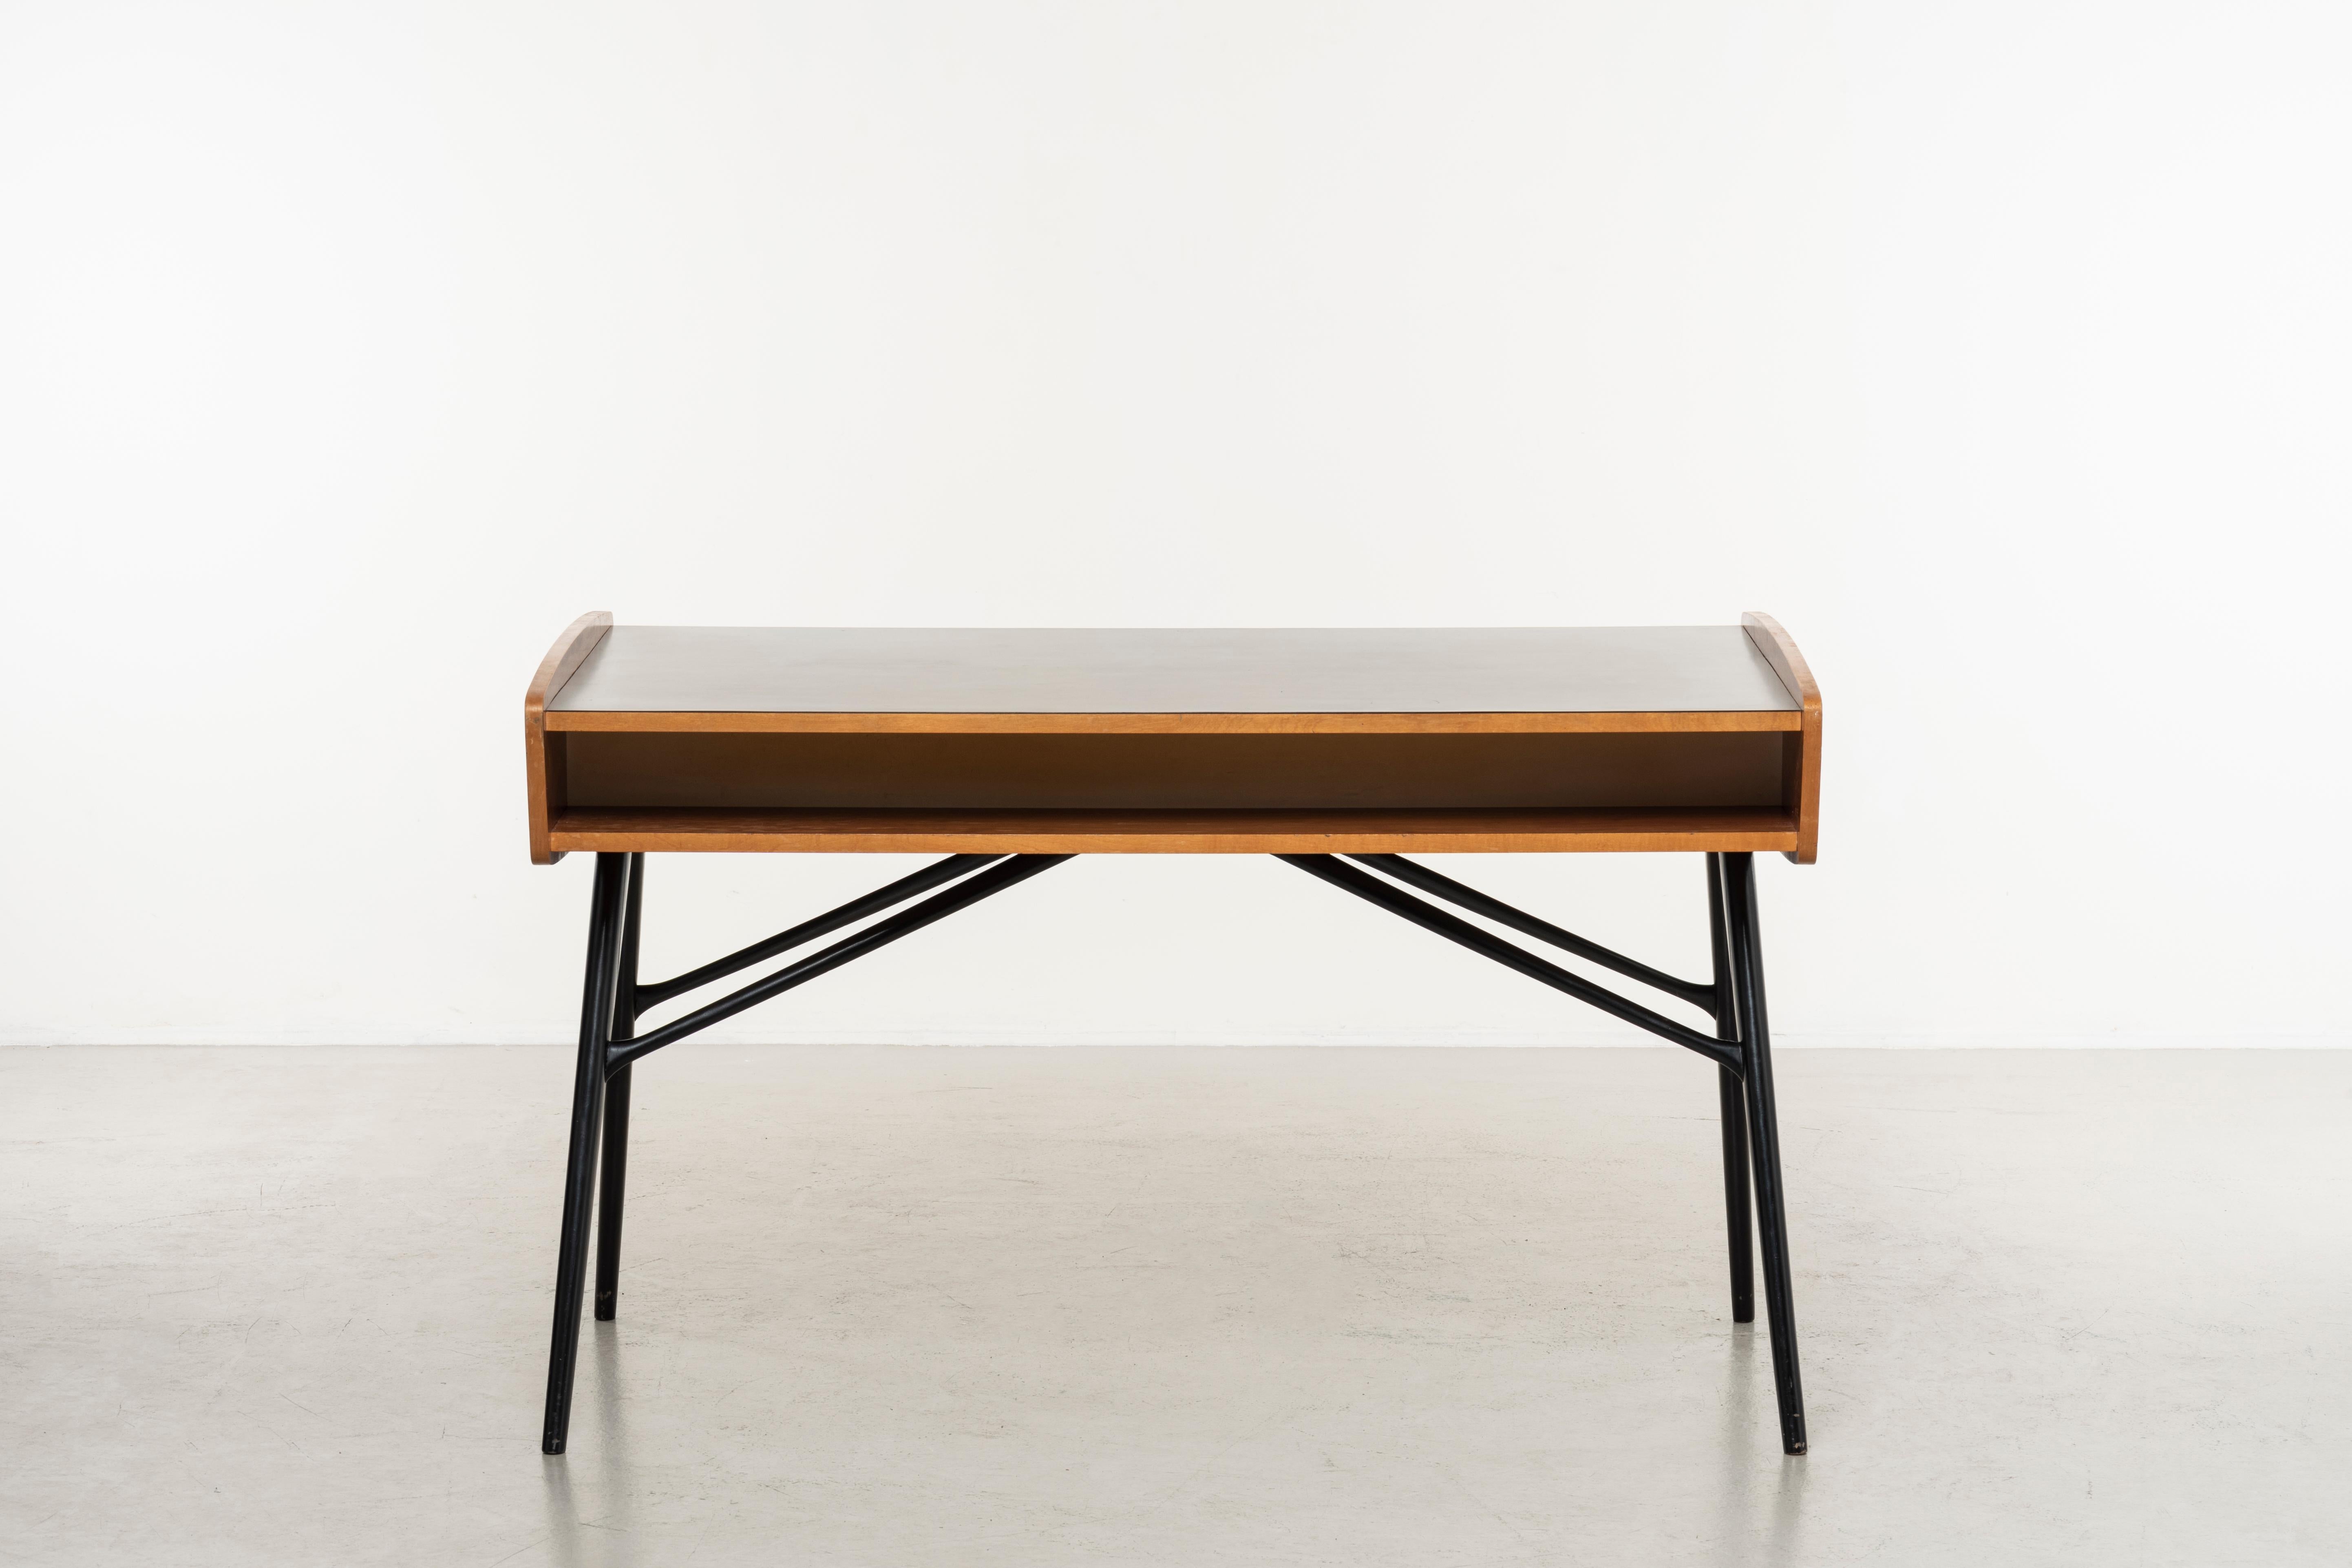 Desk and chair by Alfred Hendrickx
Belgium, 1958
Desk: teak lacquered wood
Chair: lacquered wooden structure, fabric upholstery

desk: 124 x 77.5 x h 76.5 cm  48.8 x 30.5 x h 30.1 in
chair: 60 x 60 x h 86 cm - h seat 40 cm  23.6 x 23.6 x h 33.8 in -